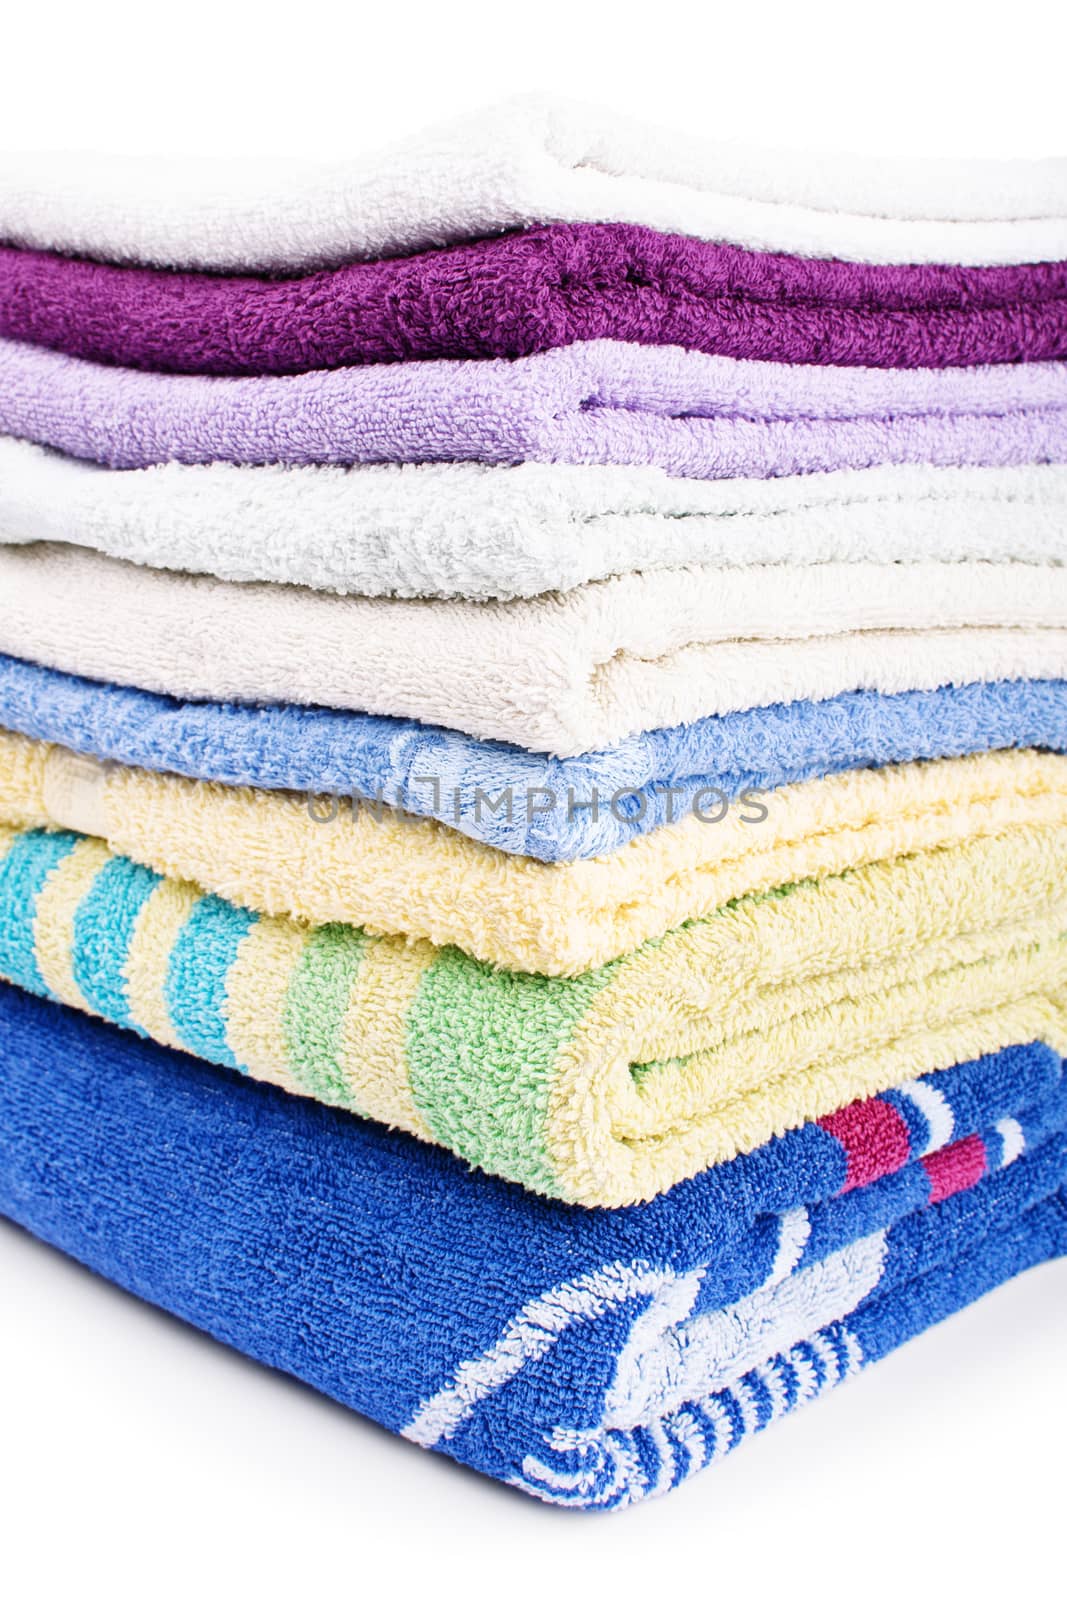 Close up shot of a pile of colorful clean bathroom towels, isolated on white background.